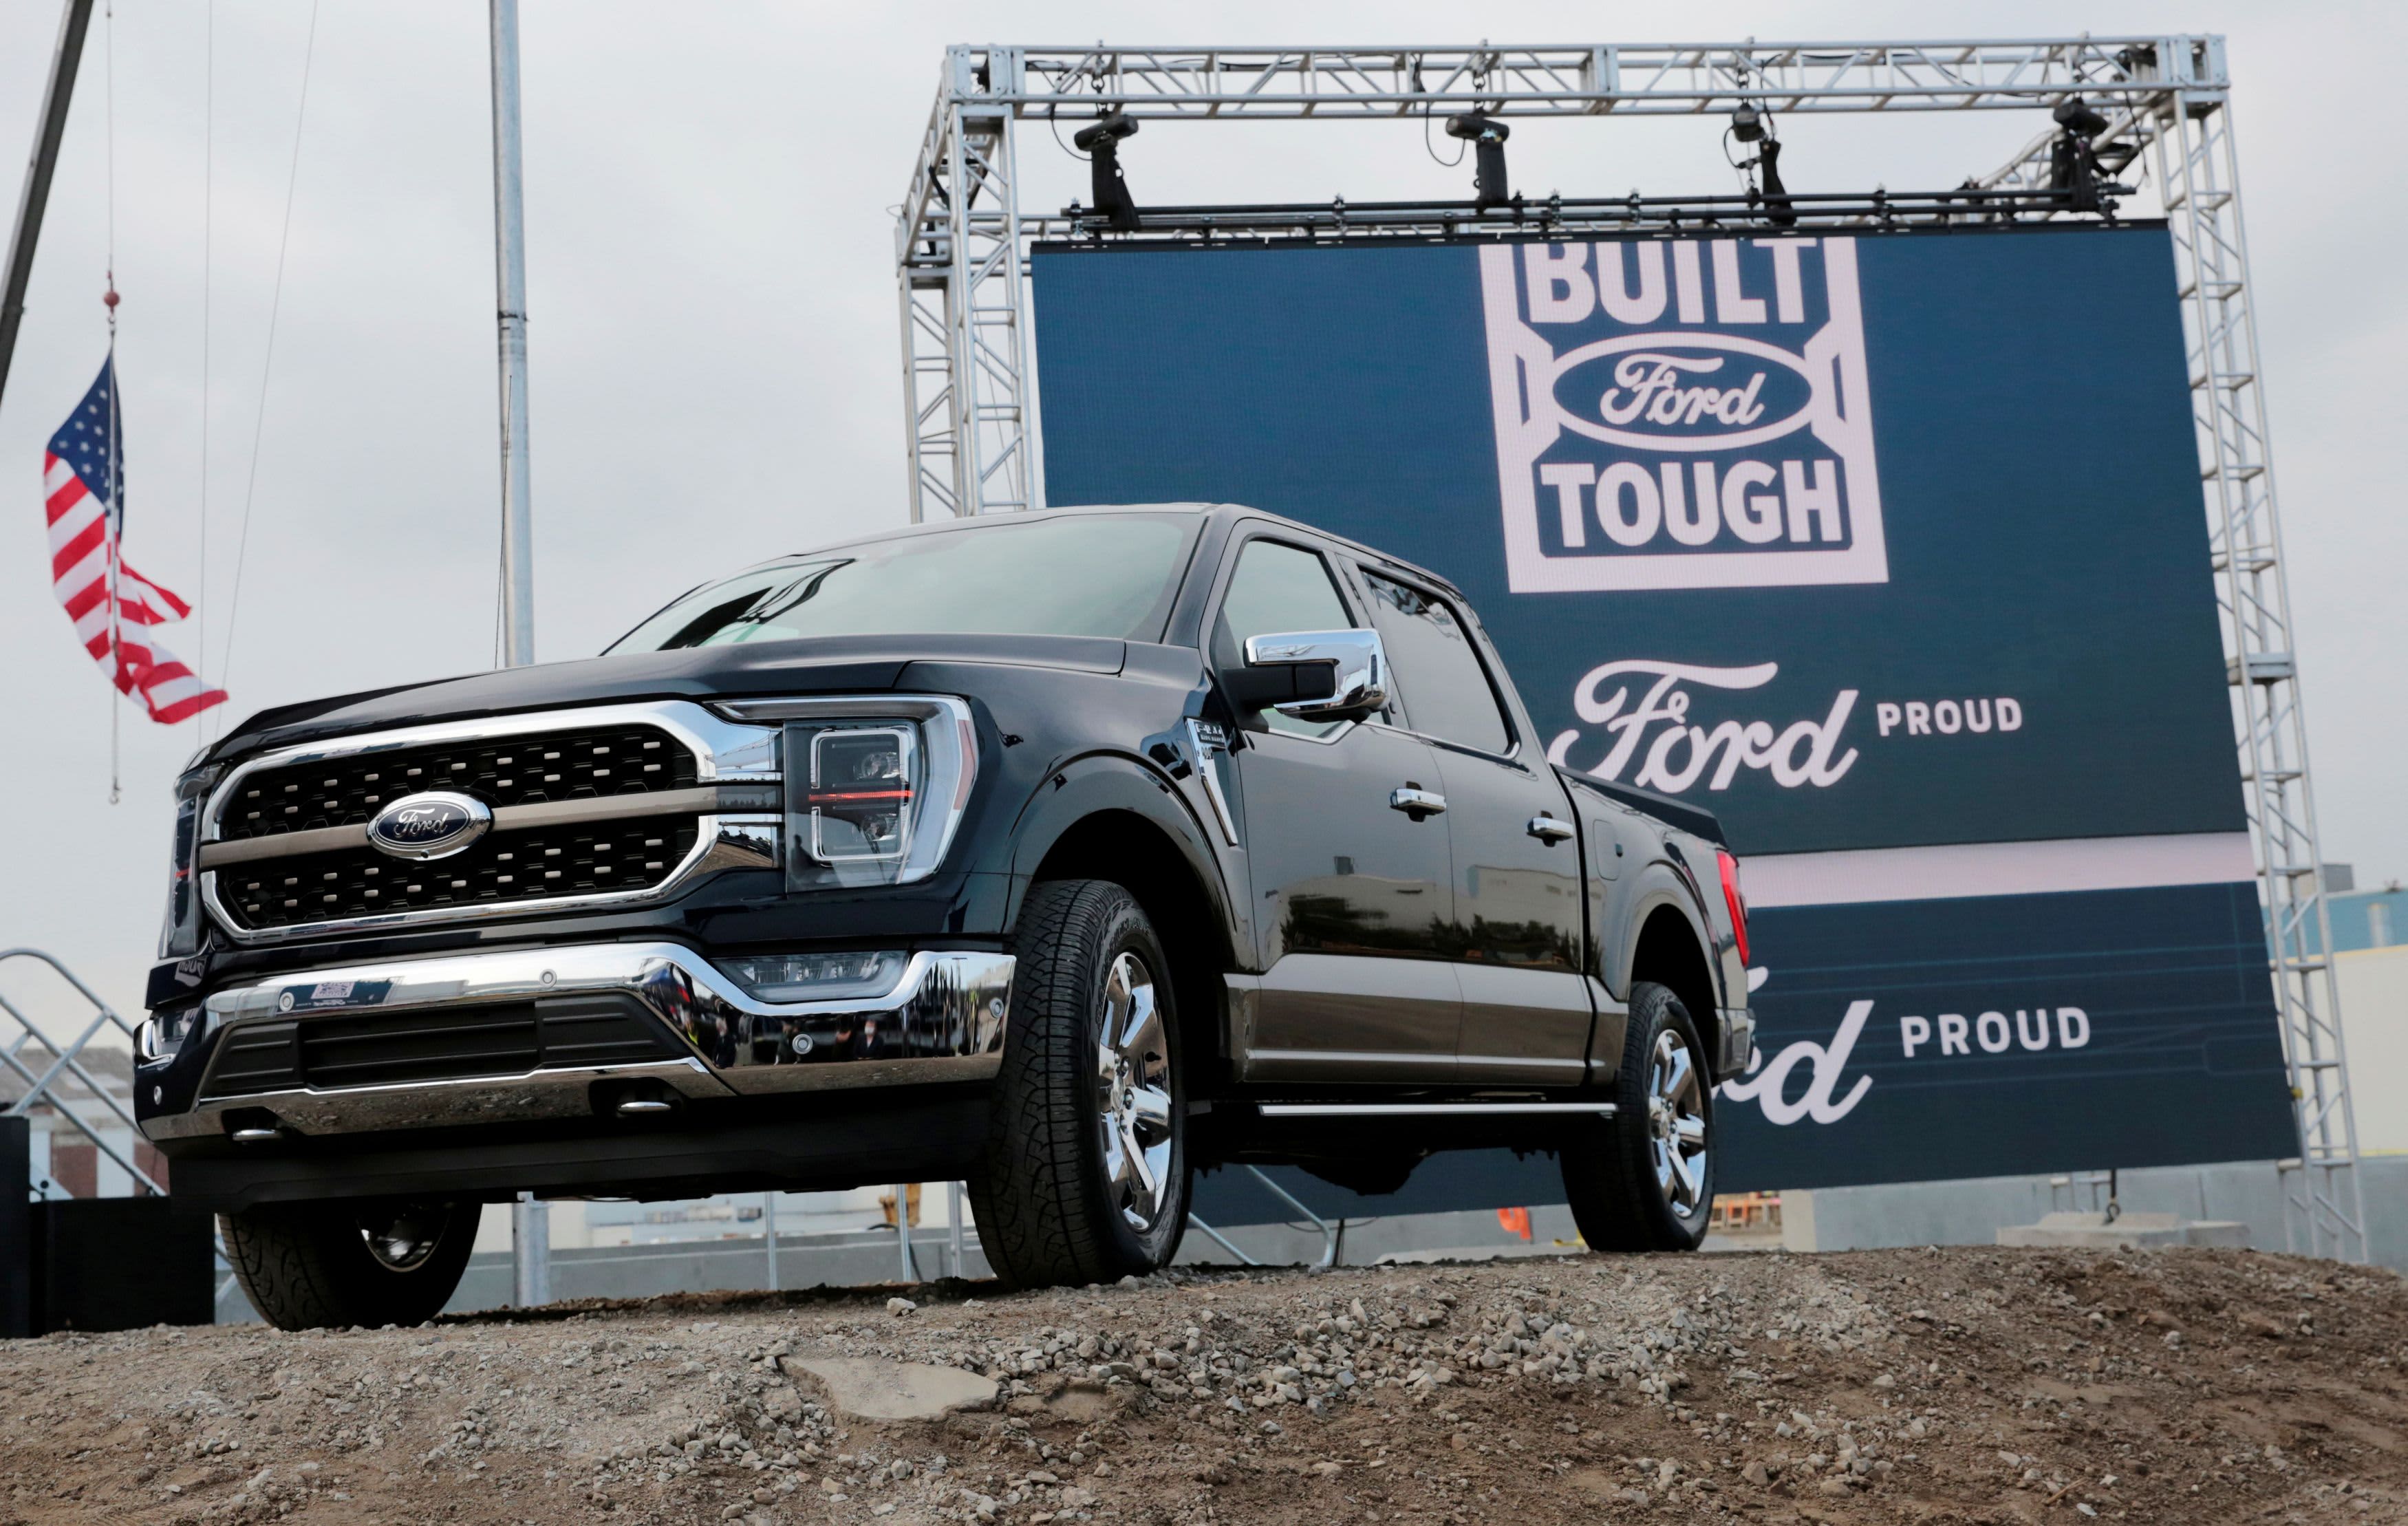 Ford cuts shifts and partially builds F-150s due to disc shortage